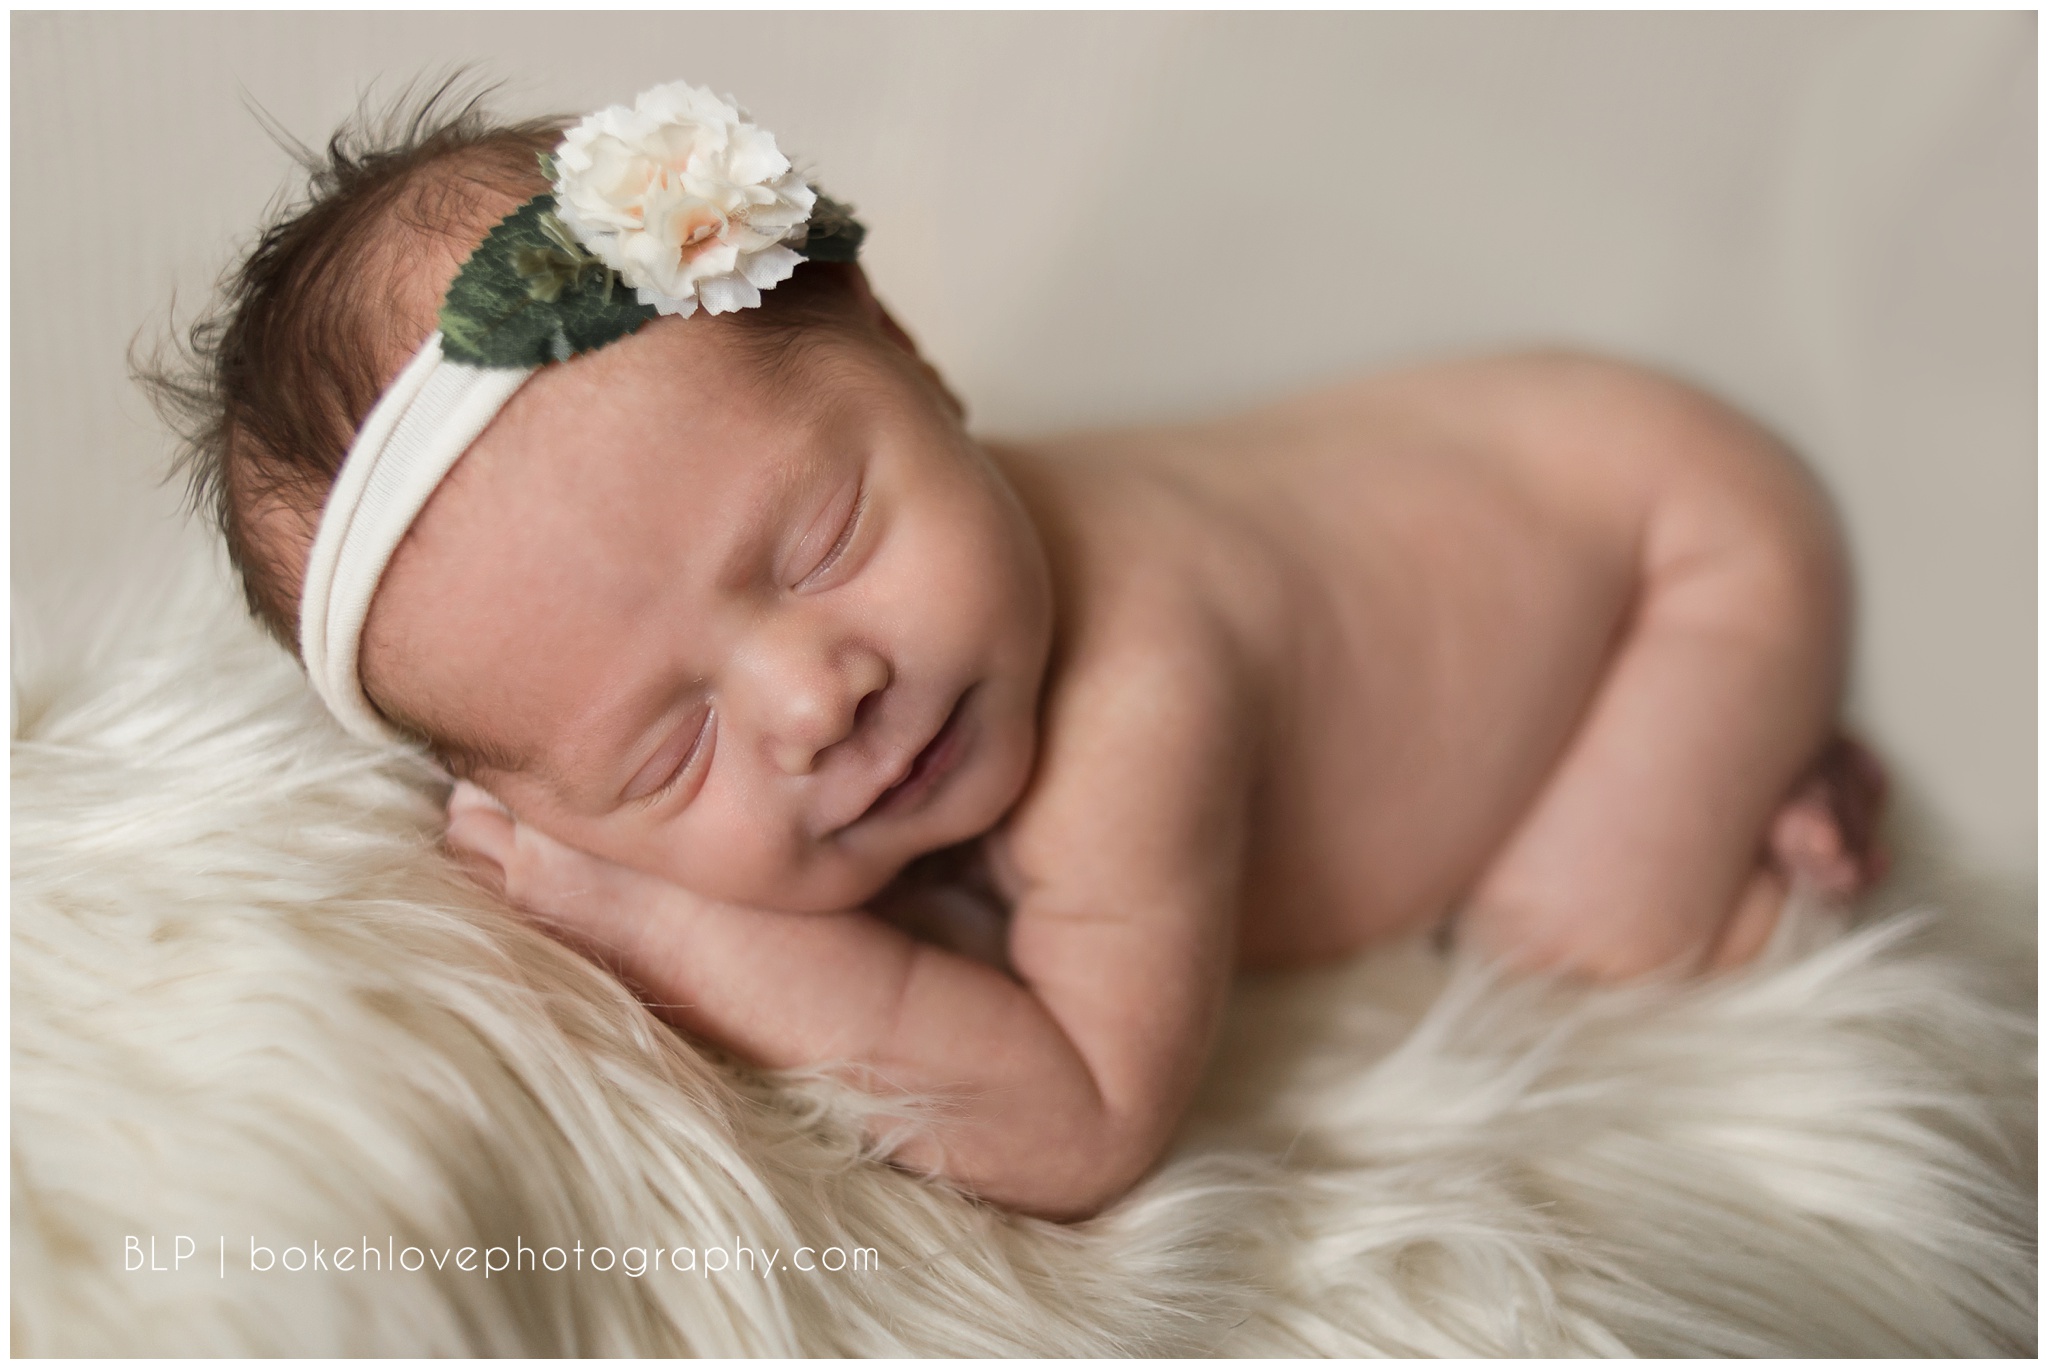 Bokeh Love Photography, Newborn Session in South Jersey, South Jersey Newborn Photographer